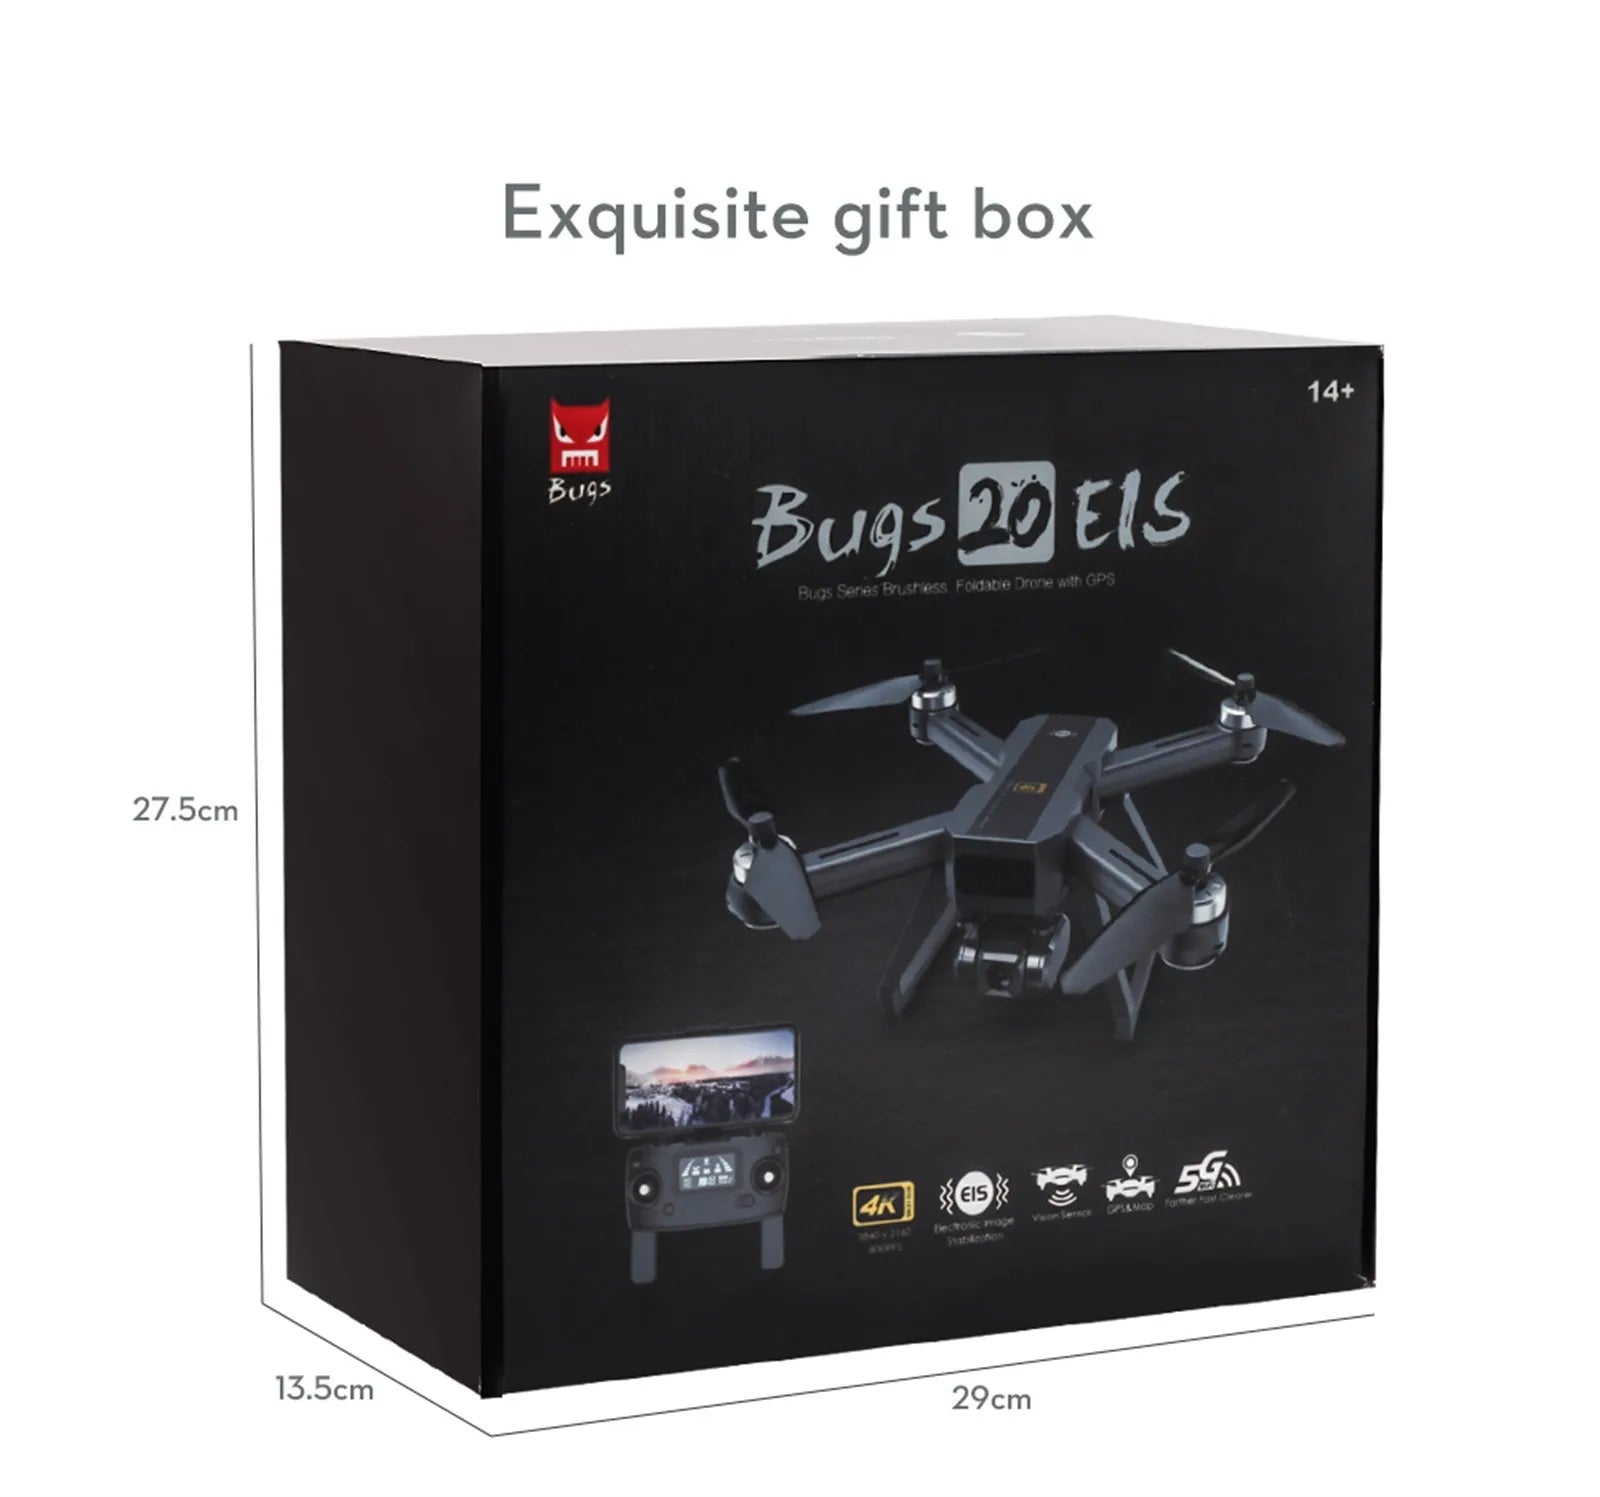 Mjx Bugs 20 Drone, Exquisite box 14+ Bugs Bugseels Auos Seres Fo